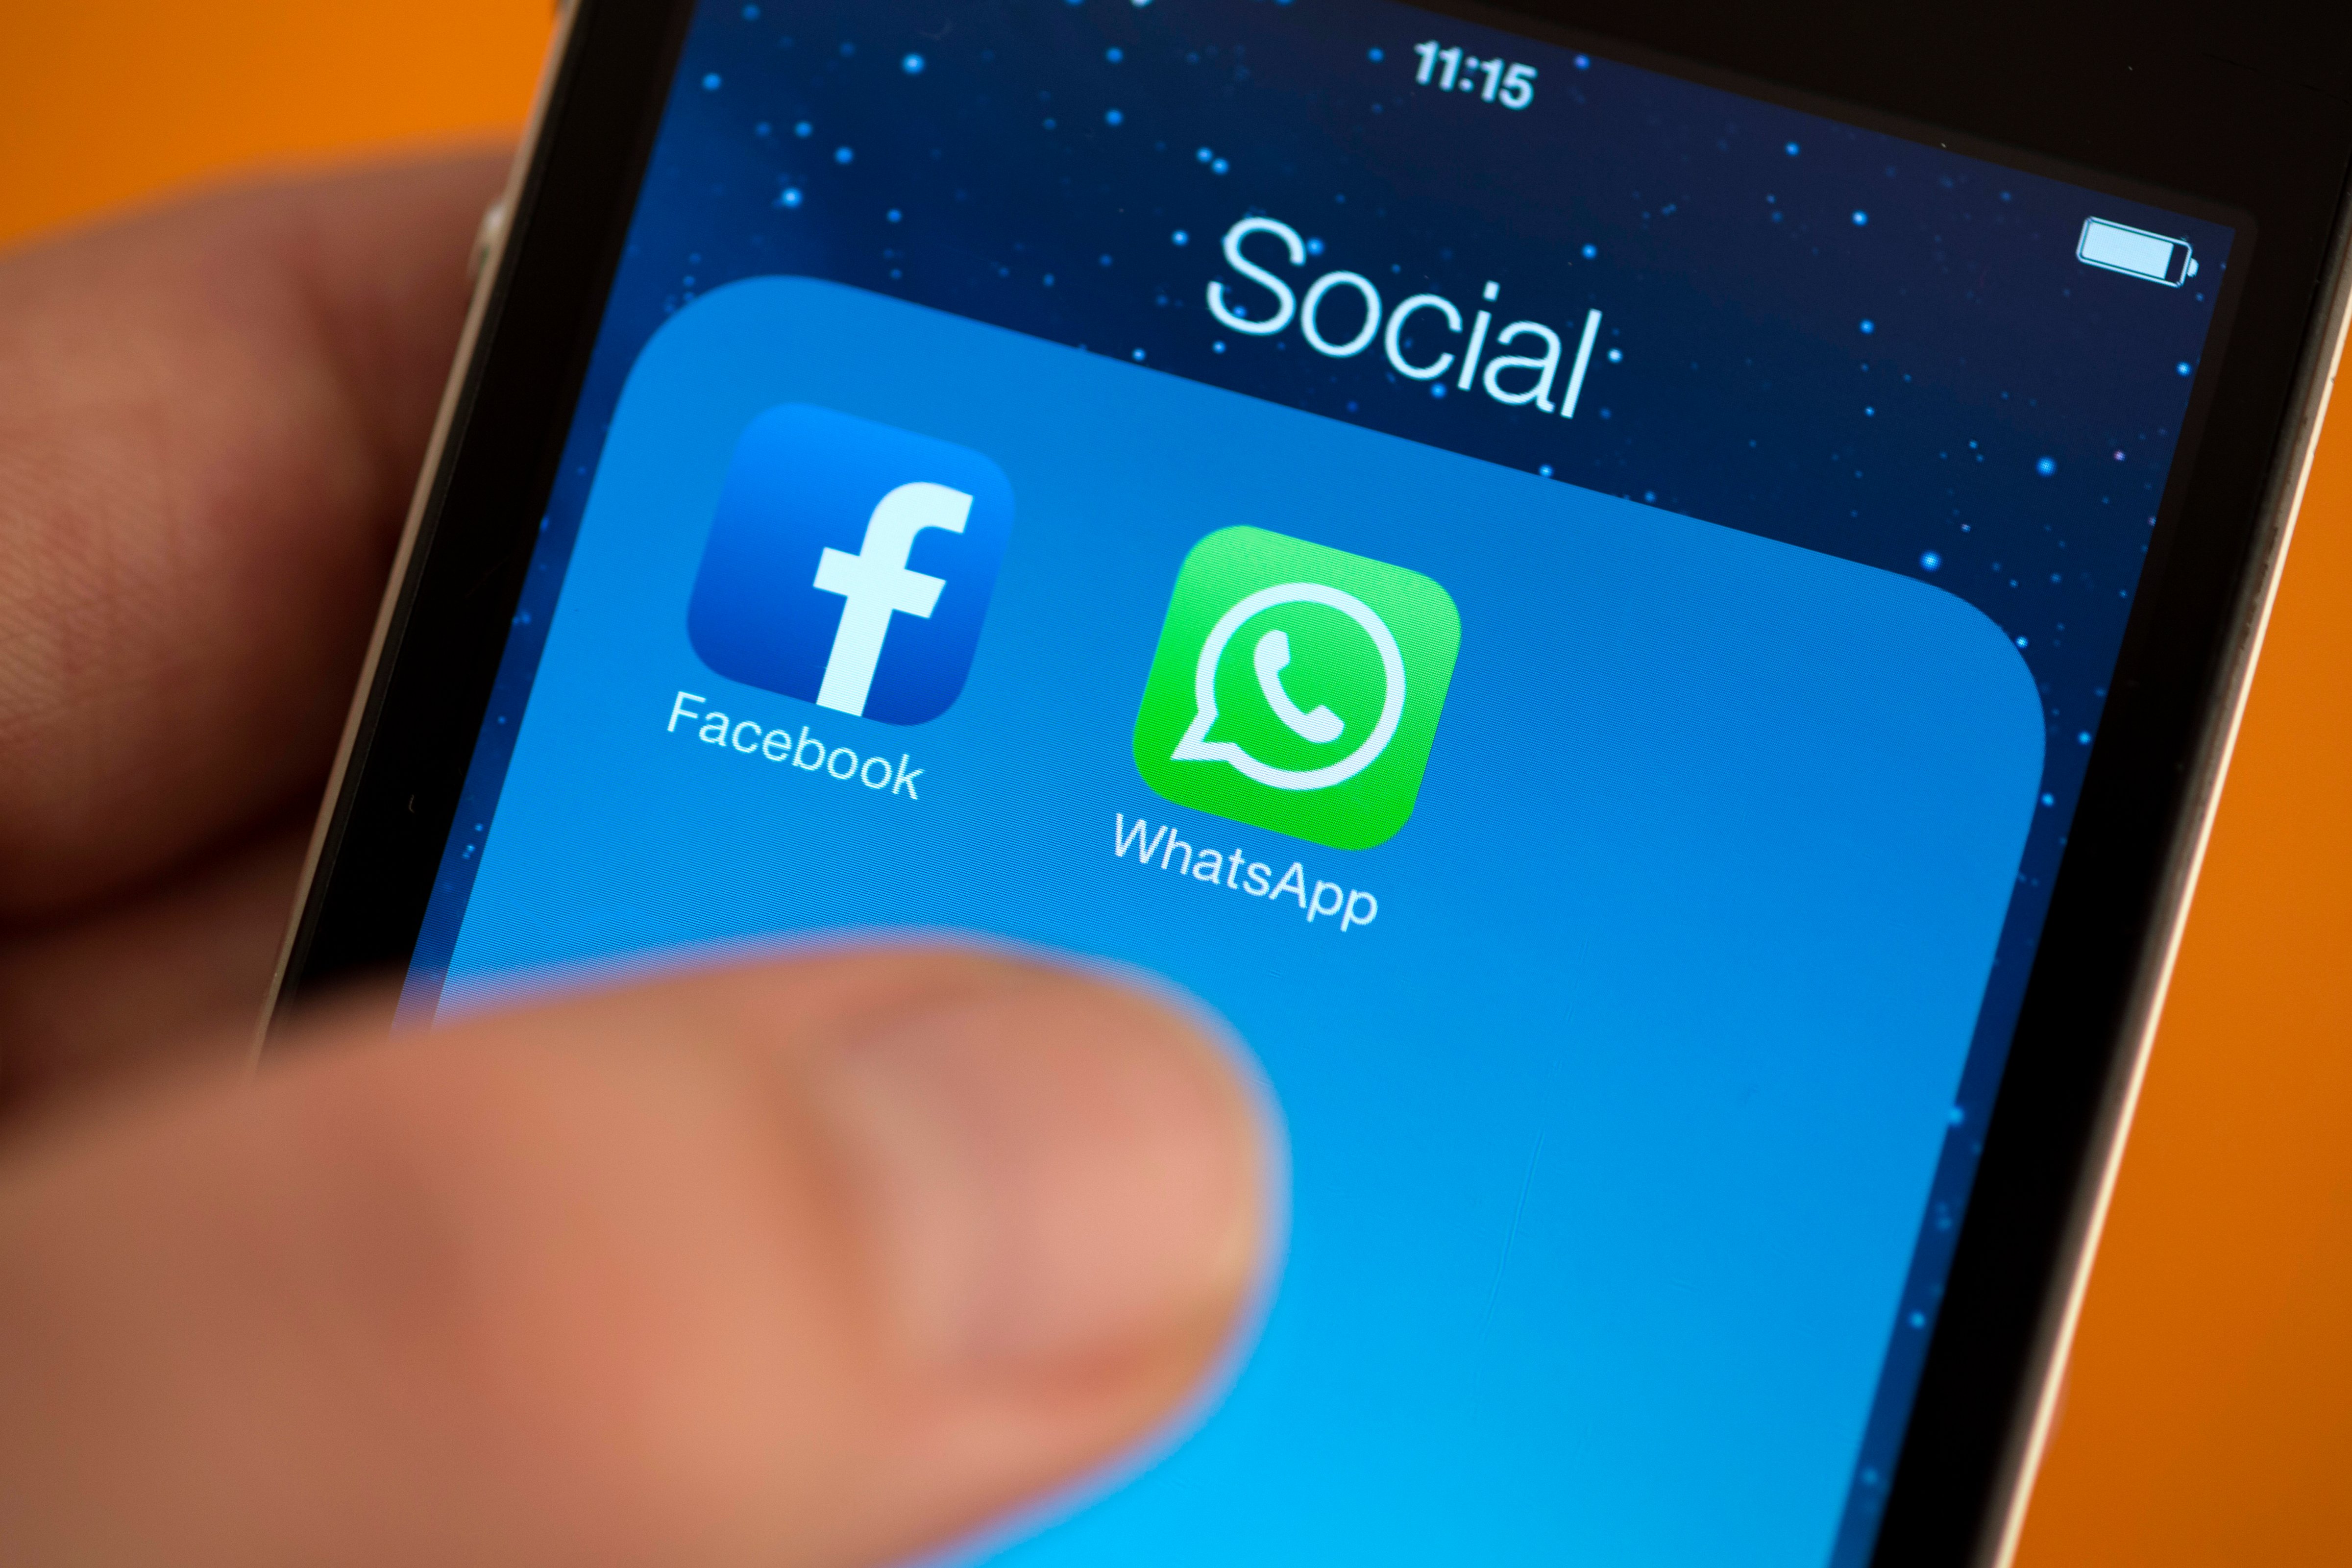 Facebook next to the WhatsApp logo on iPhone hold by a hand. on February 25, 2014 in Berlin, Germany. (Marie Waldmann&mdash;Photothek via Getty Images)